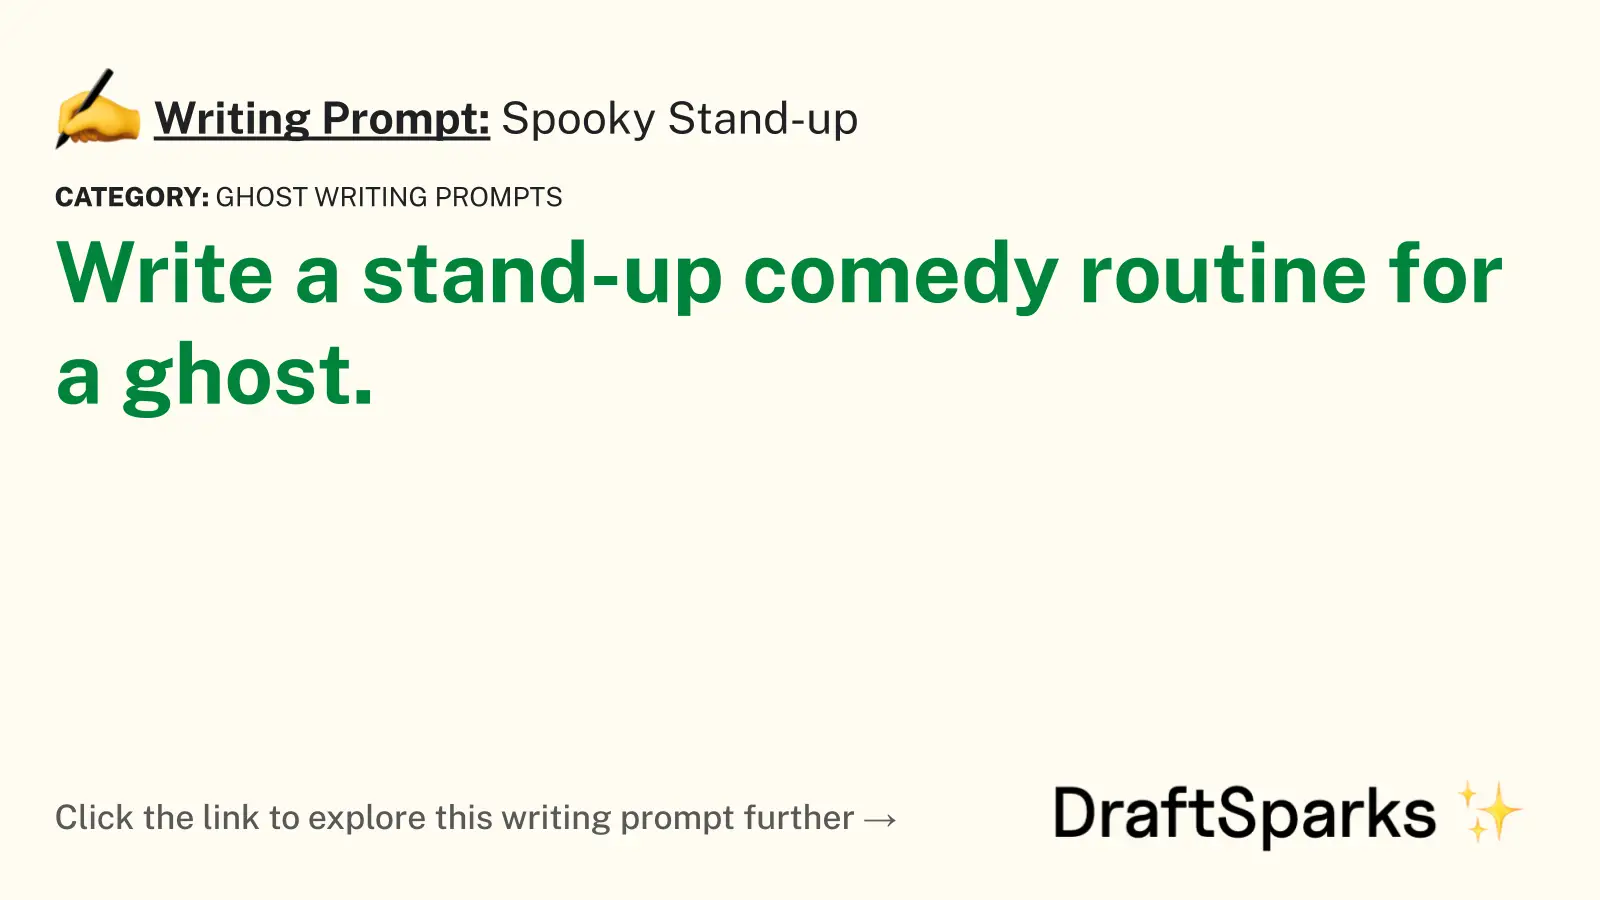 Spooky Stand-up